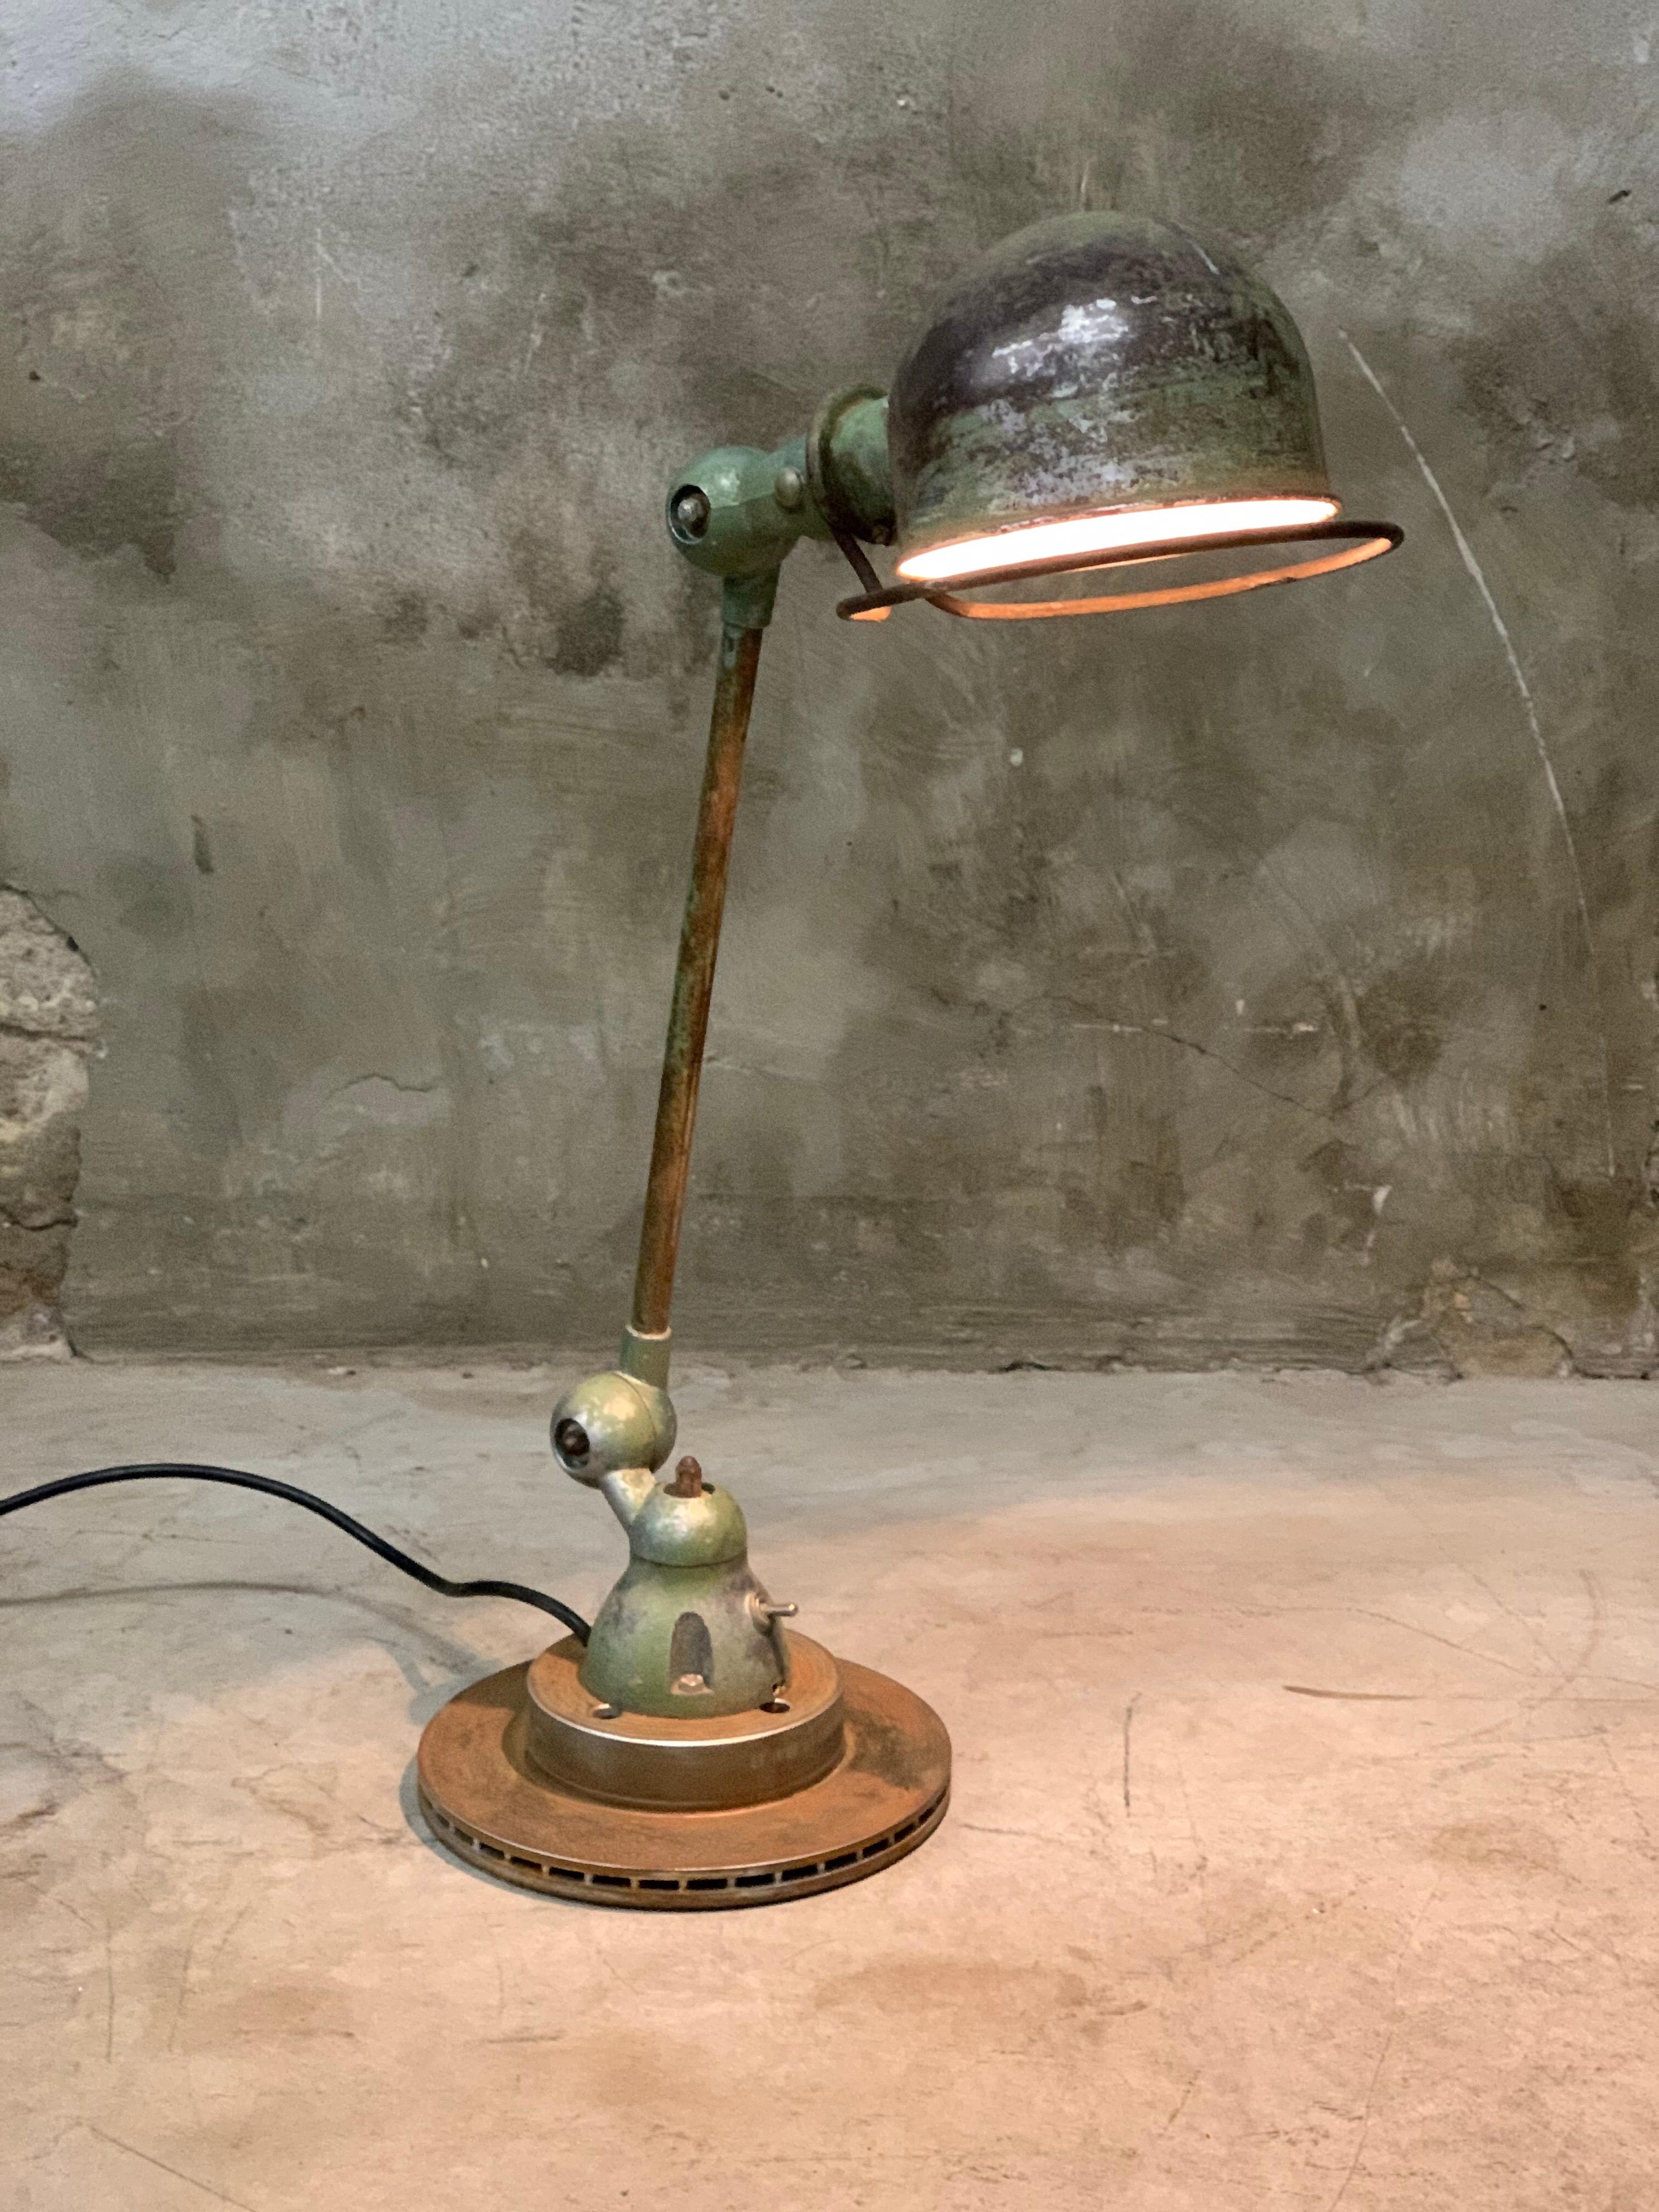 Industrial lamp by Jean-Louis Domecq for Jieldé, France, 1960s. This original old Jieldé table lamp has a fantastic patina! Bayonet lamp fitting including lamp (can still be ordered if it breaks). Placed on an old brake disc. 

Flip switch in the